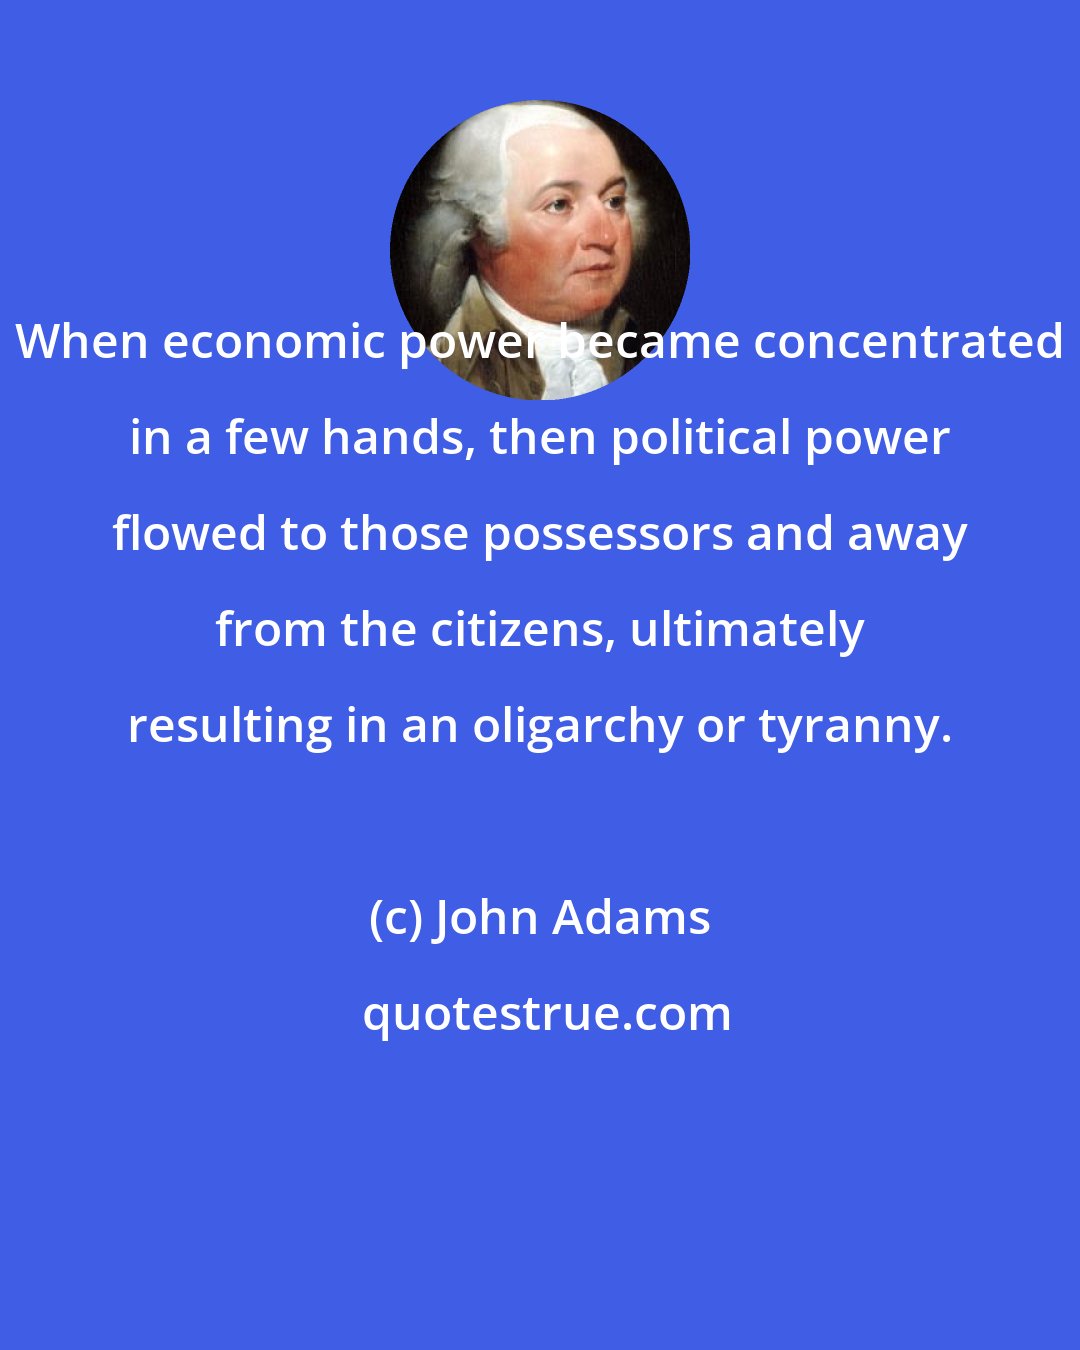 John Adams: When economic power became concentrated in a few hands, then political power flowed to those possessors and away from the citizens, ultimately resulting in an oligarchy or tyranny.